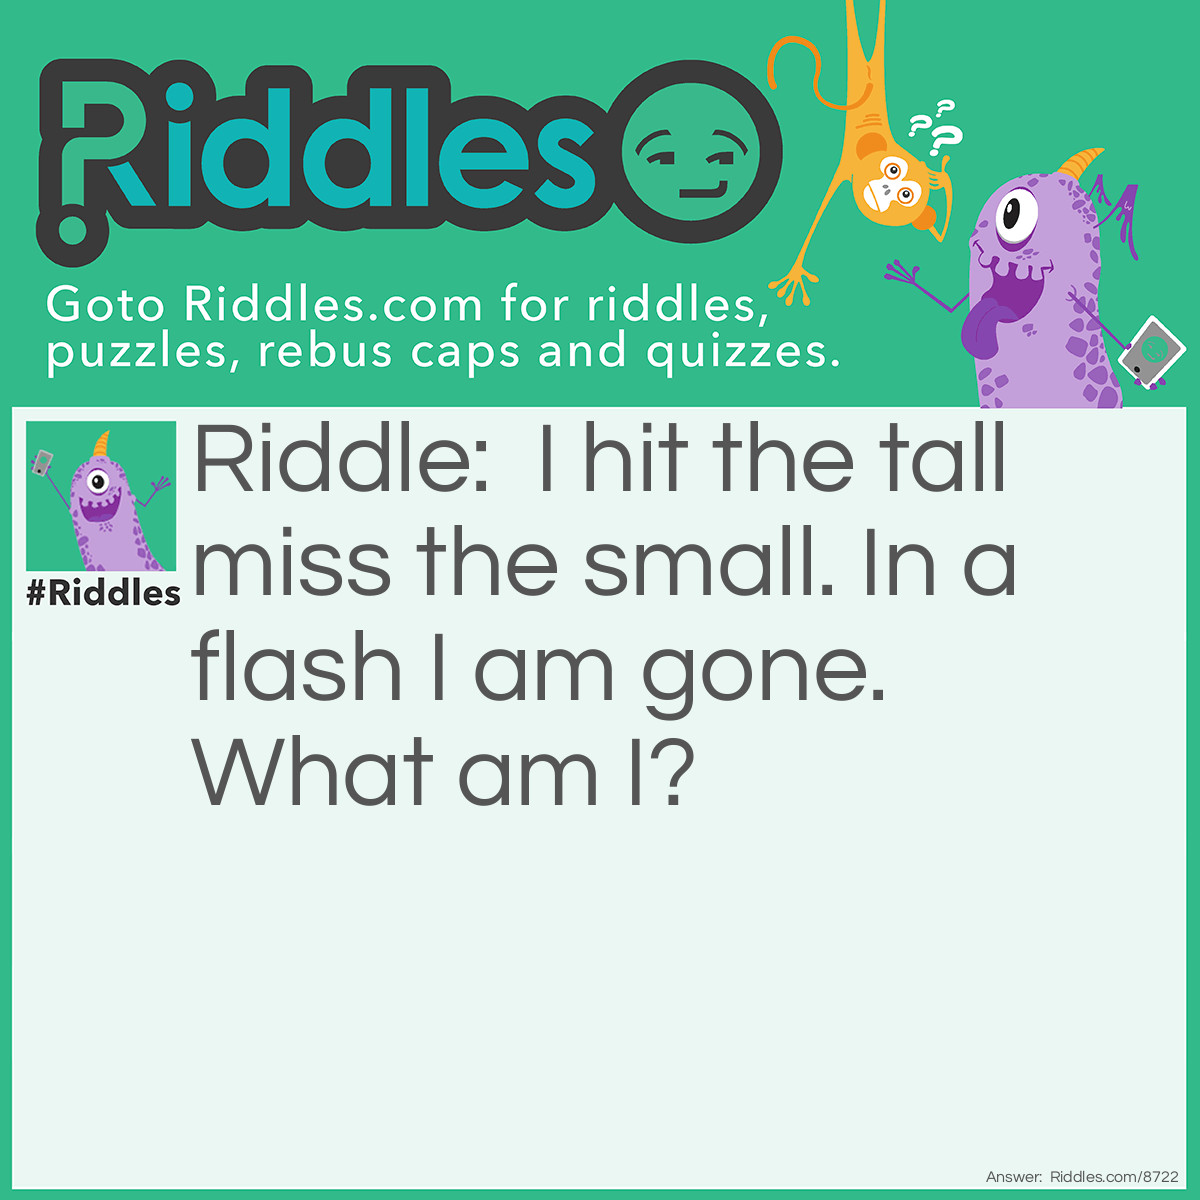 Riddle: I hit the tall miss the small. In a flash I am gone. What am I? Answer: Lightning.